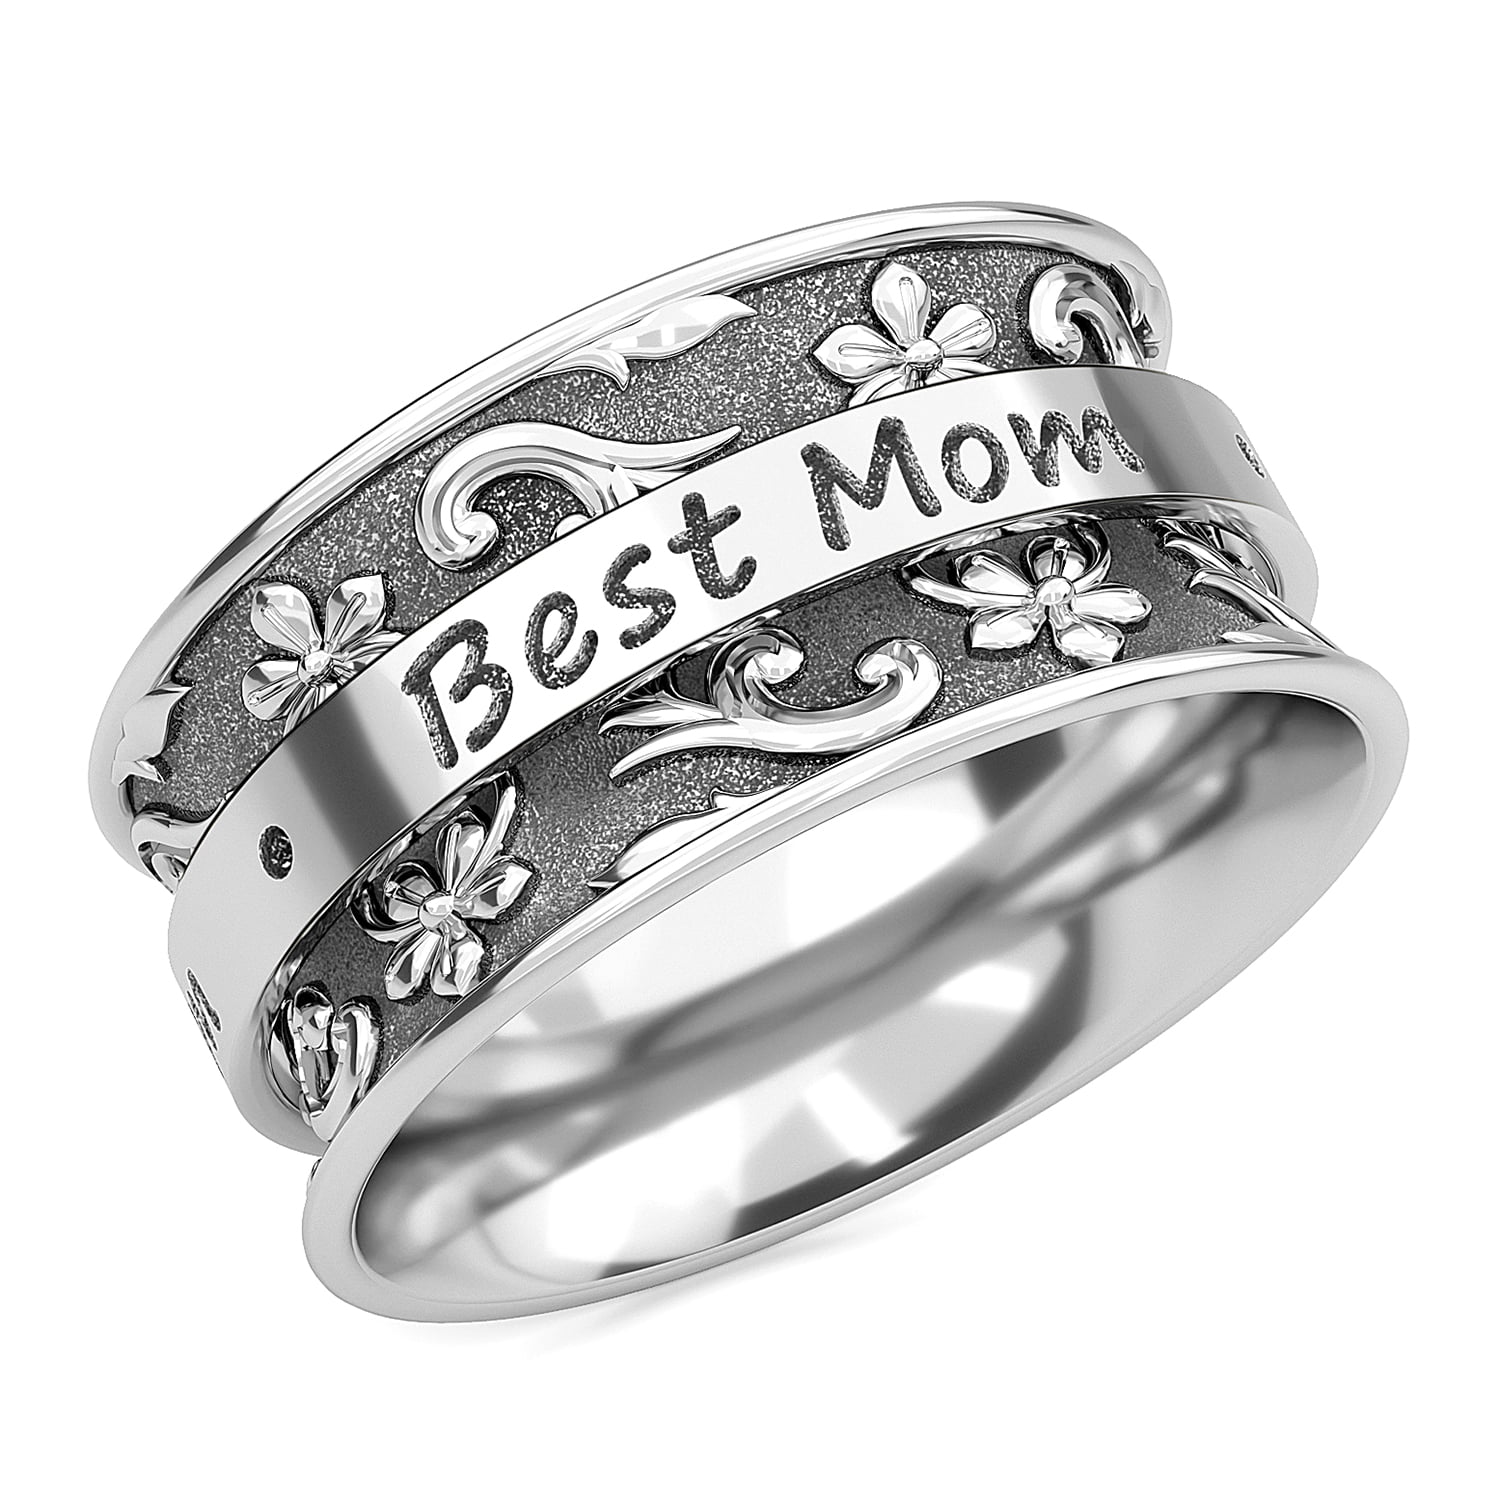 Superb 925 Sterling Silver Triple Spinning wheel Spinner Curved Ring Gift Boxed 